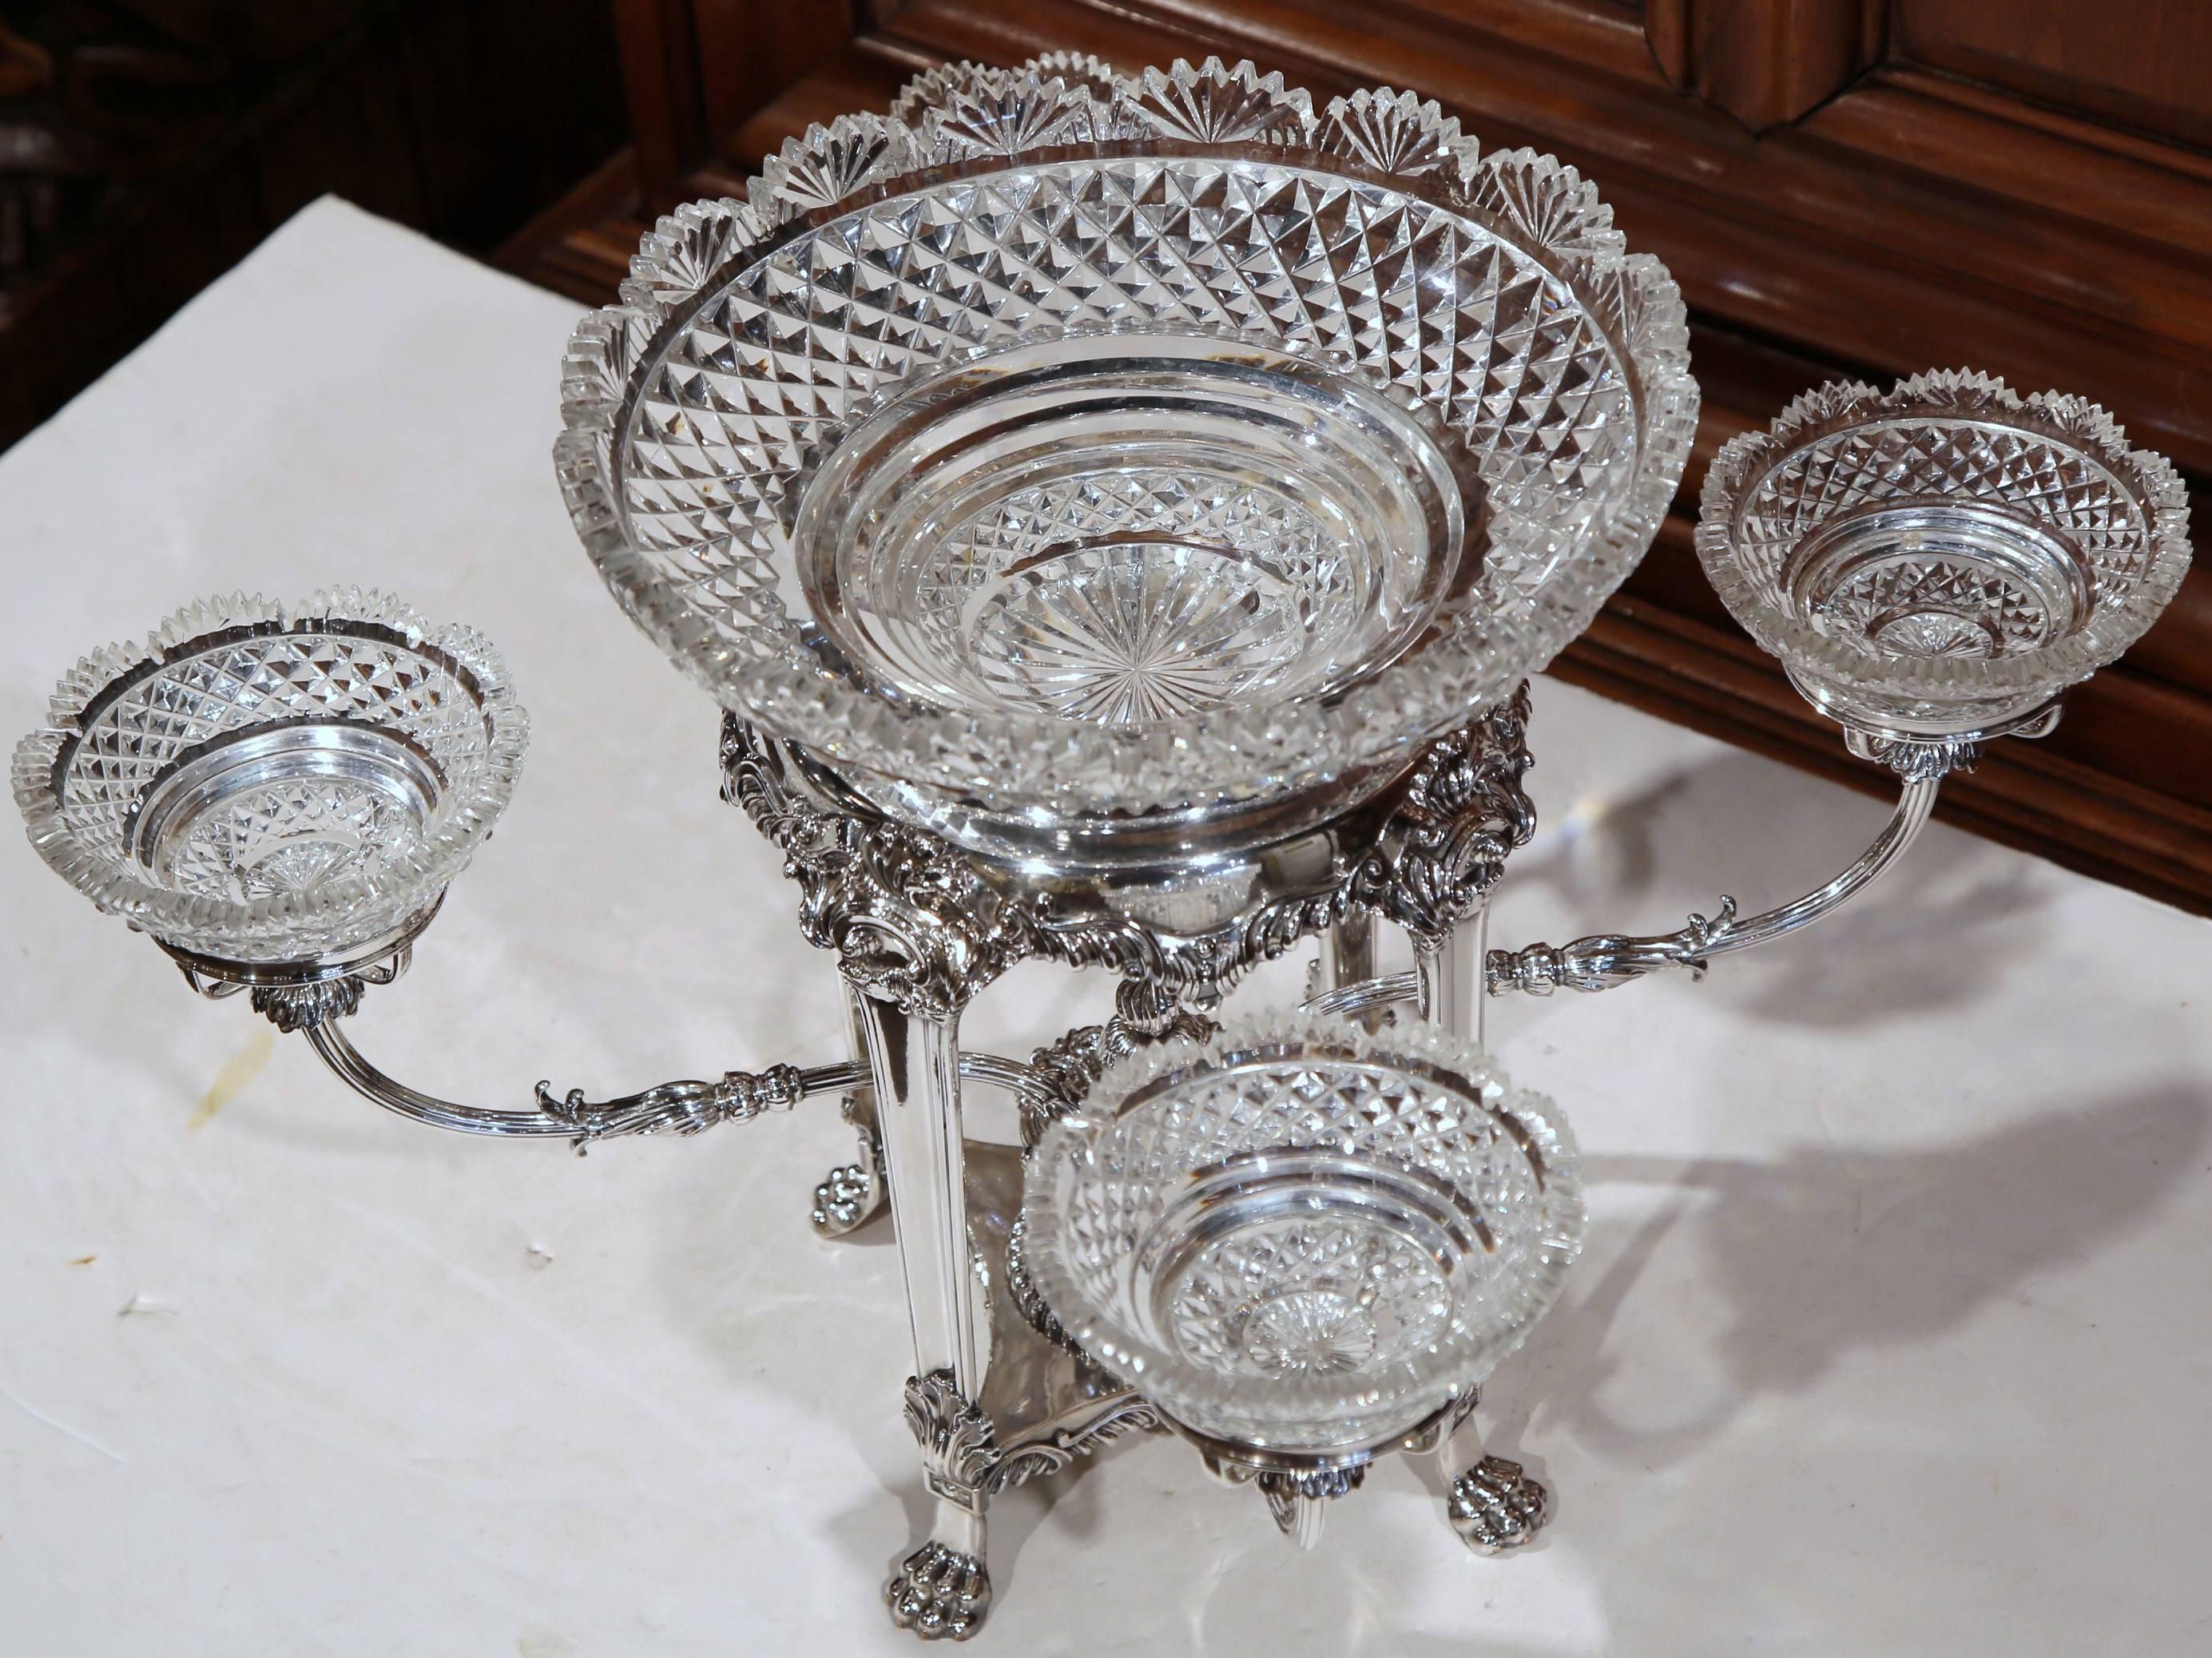 19th Century English George III Style Silver-Plated and Cut-Glass Epergne 2